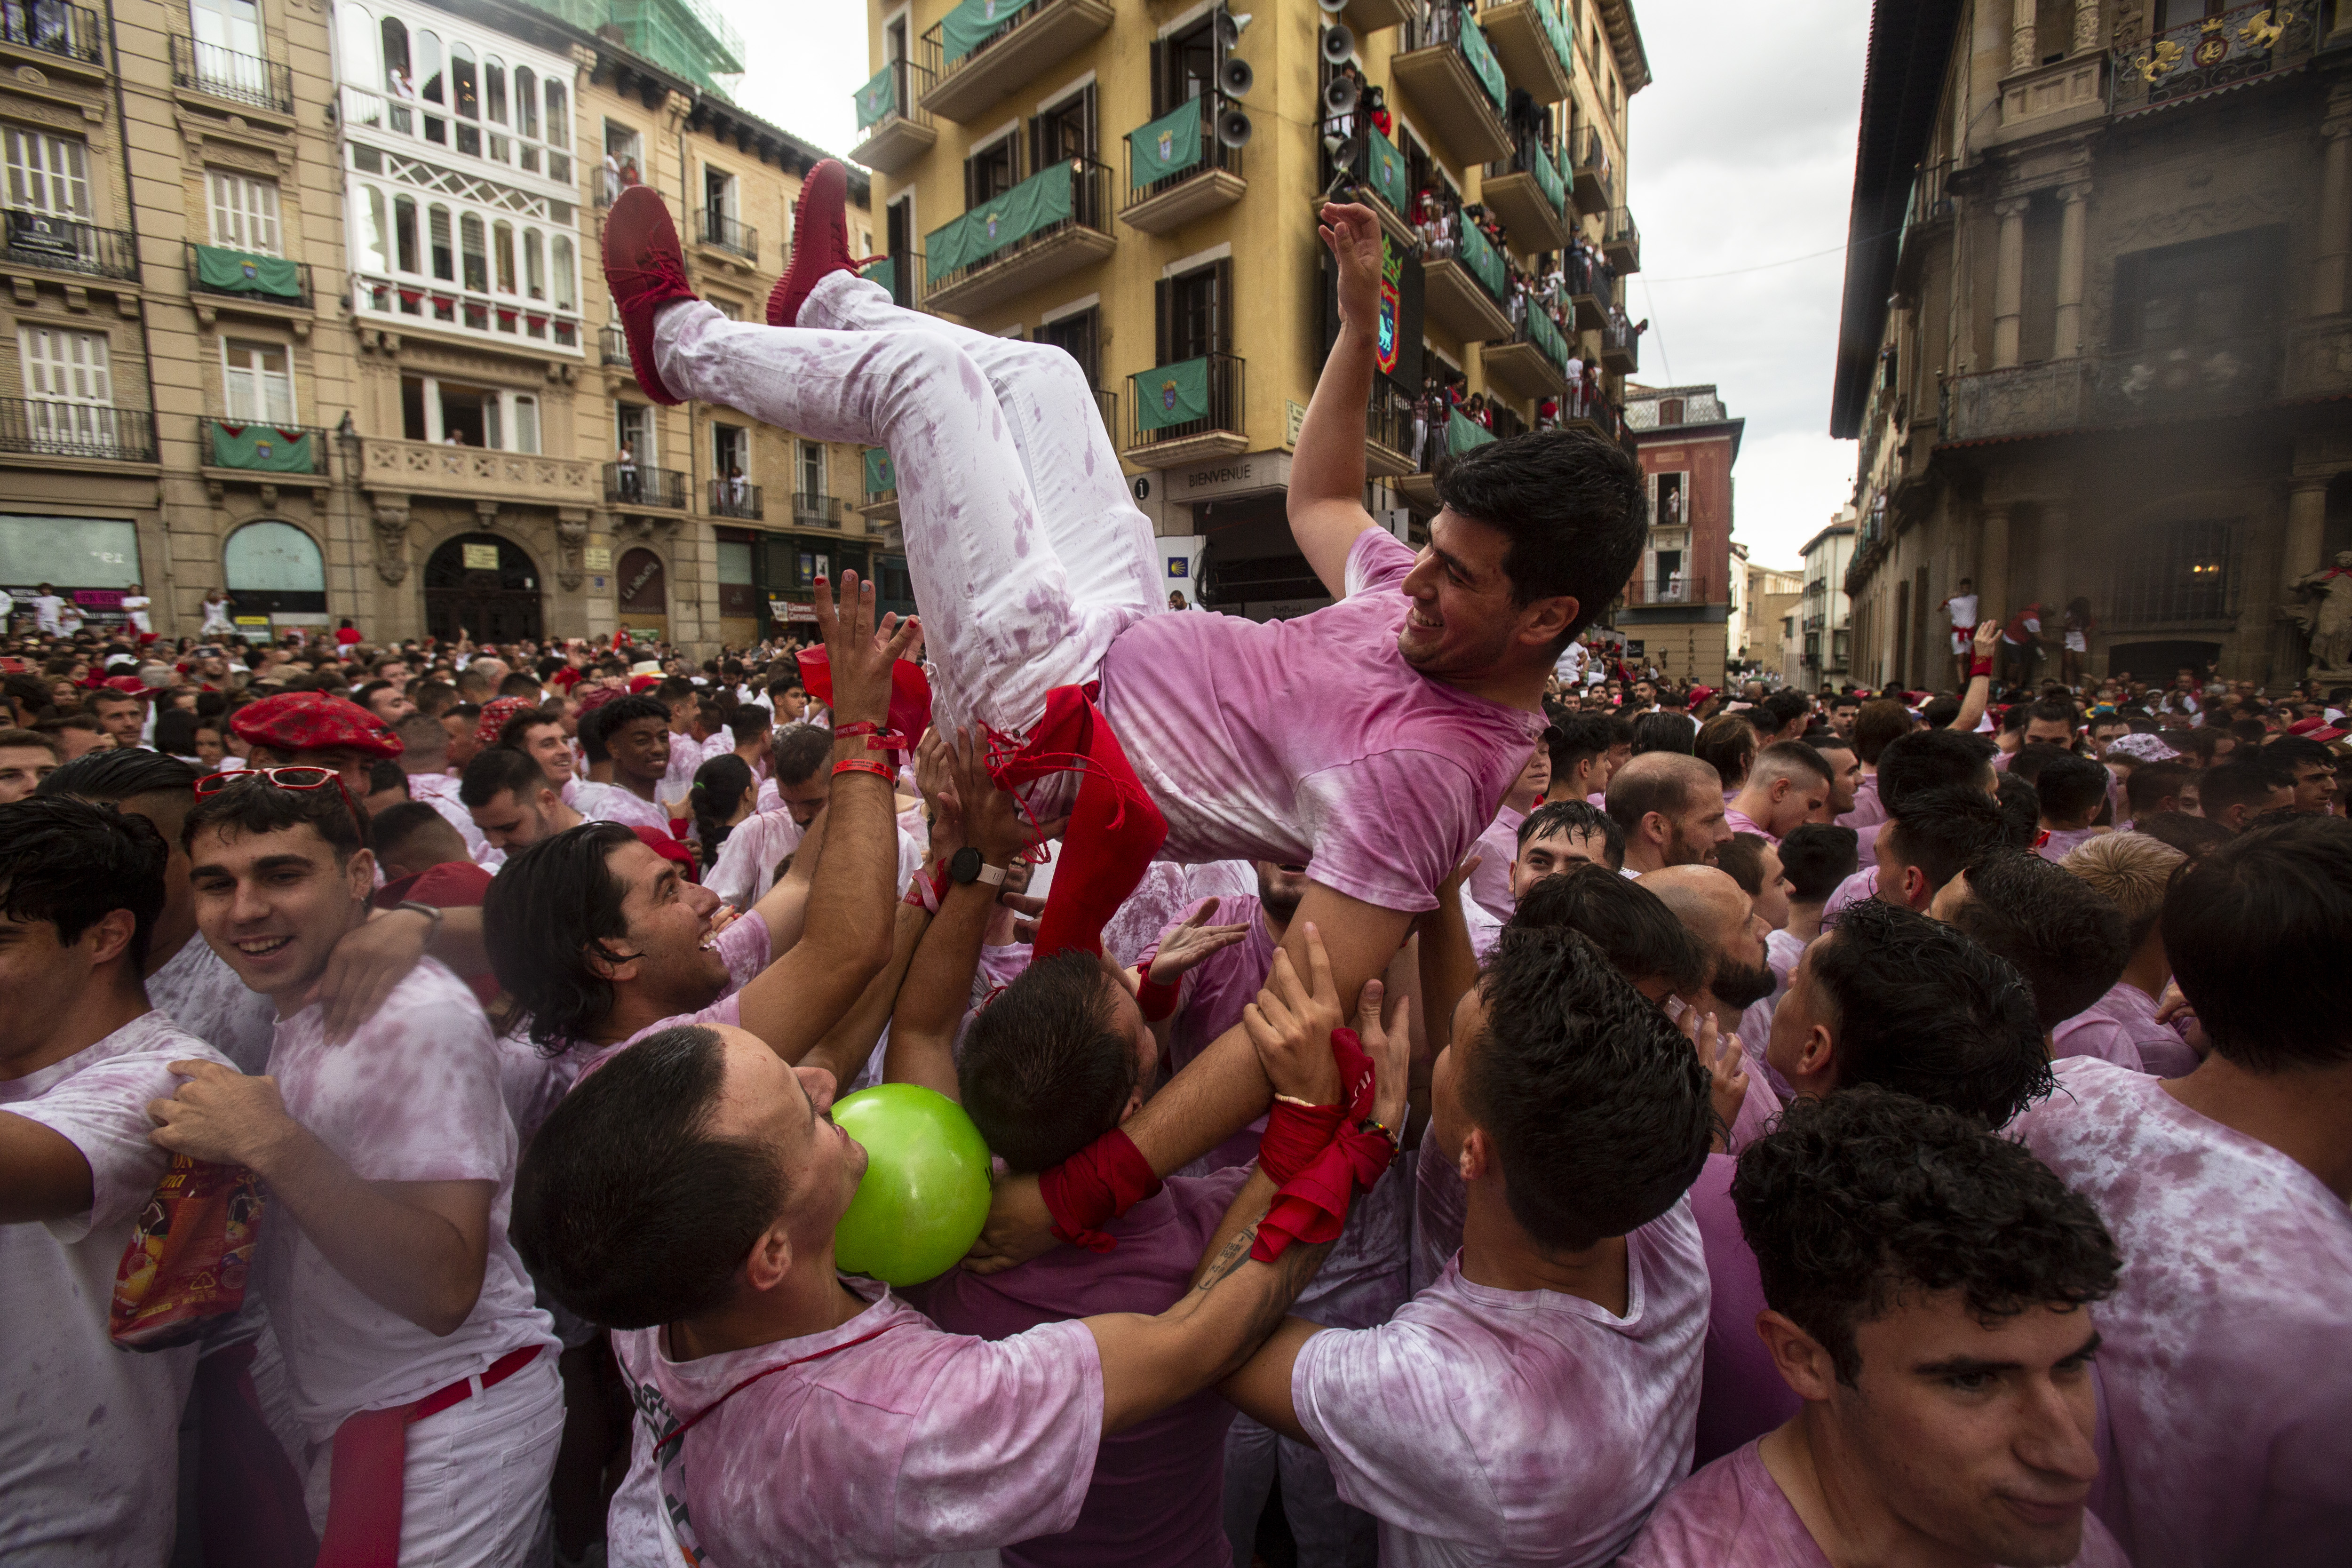 Thousands take part in first running of the bulls in Spain's San Fermin  festival